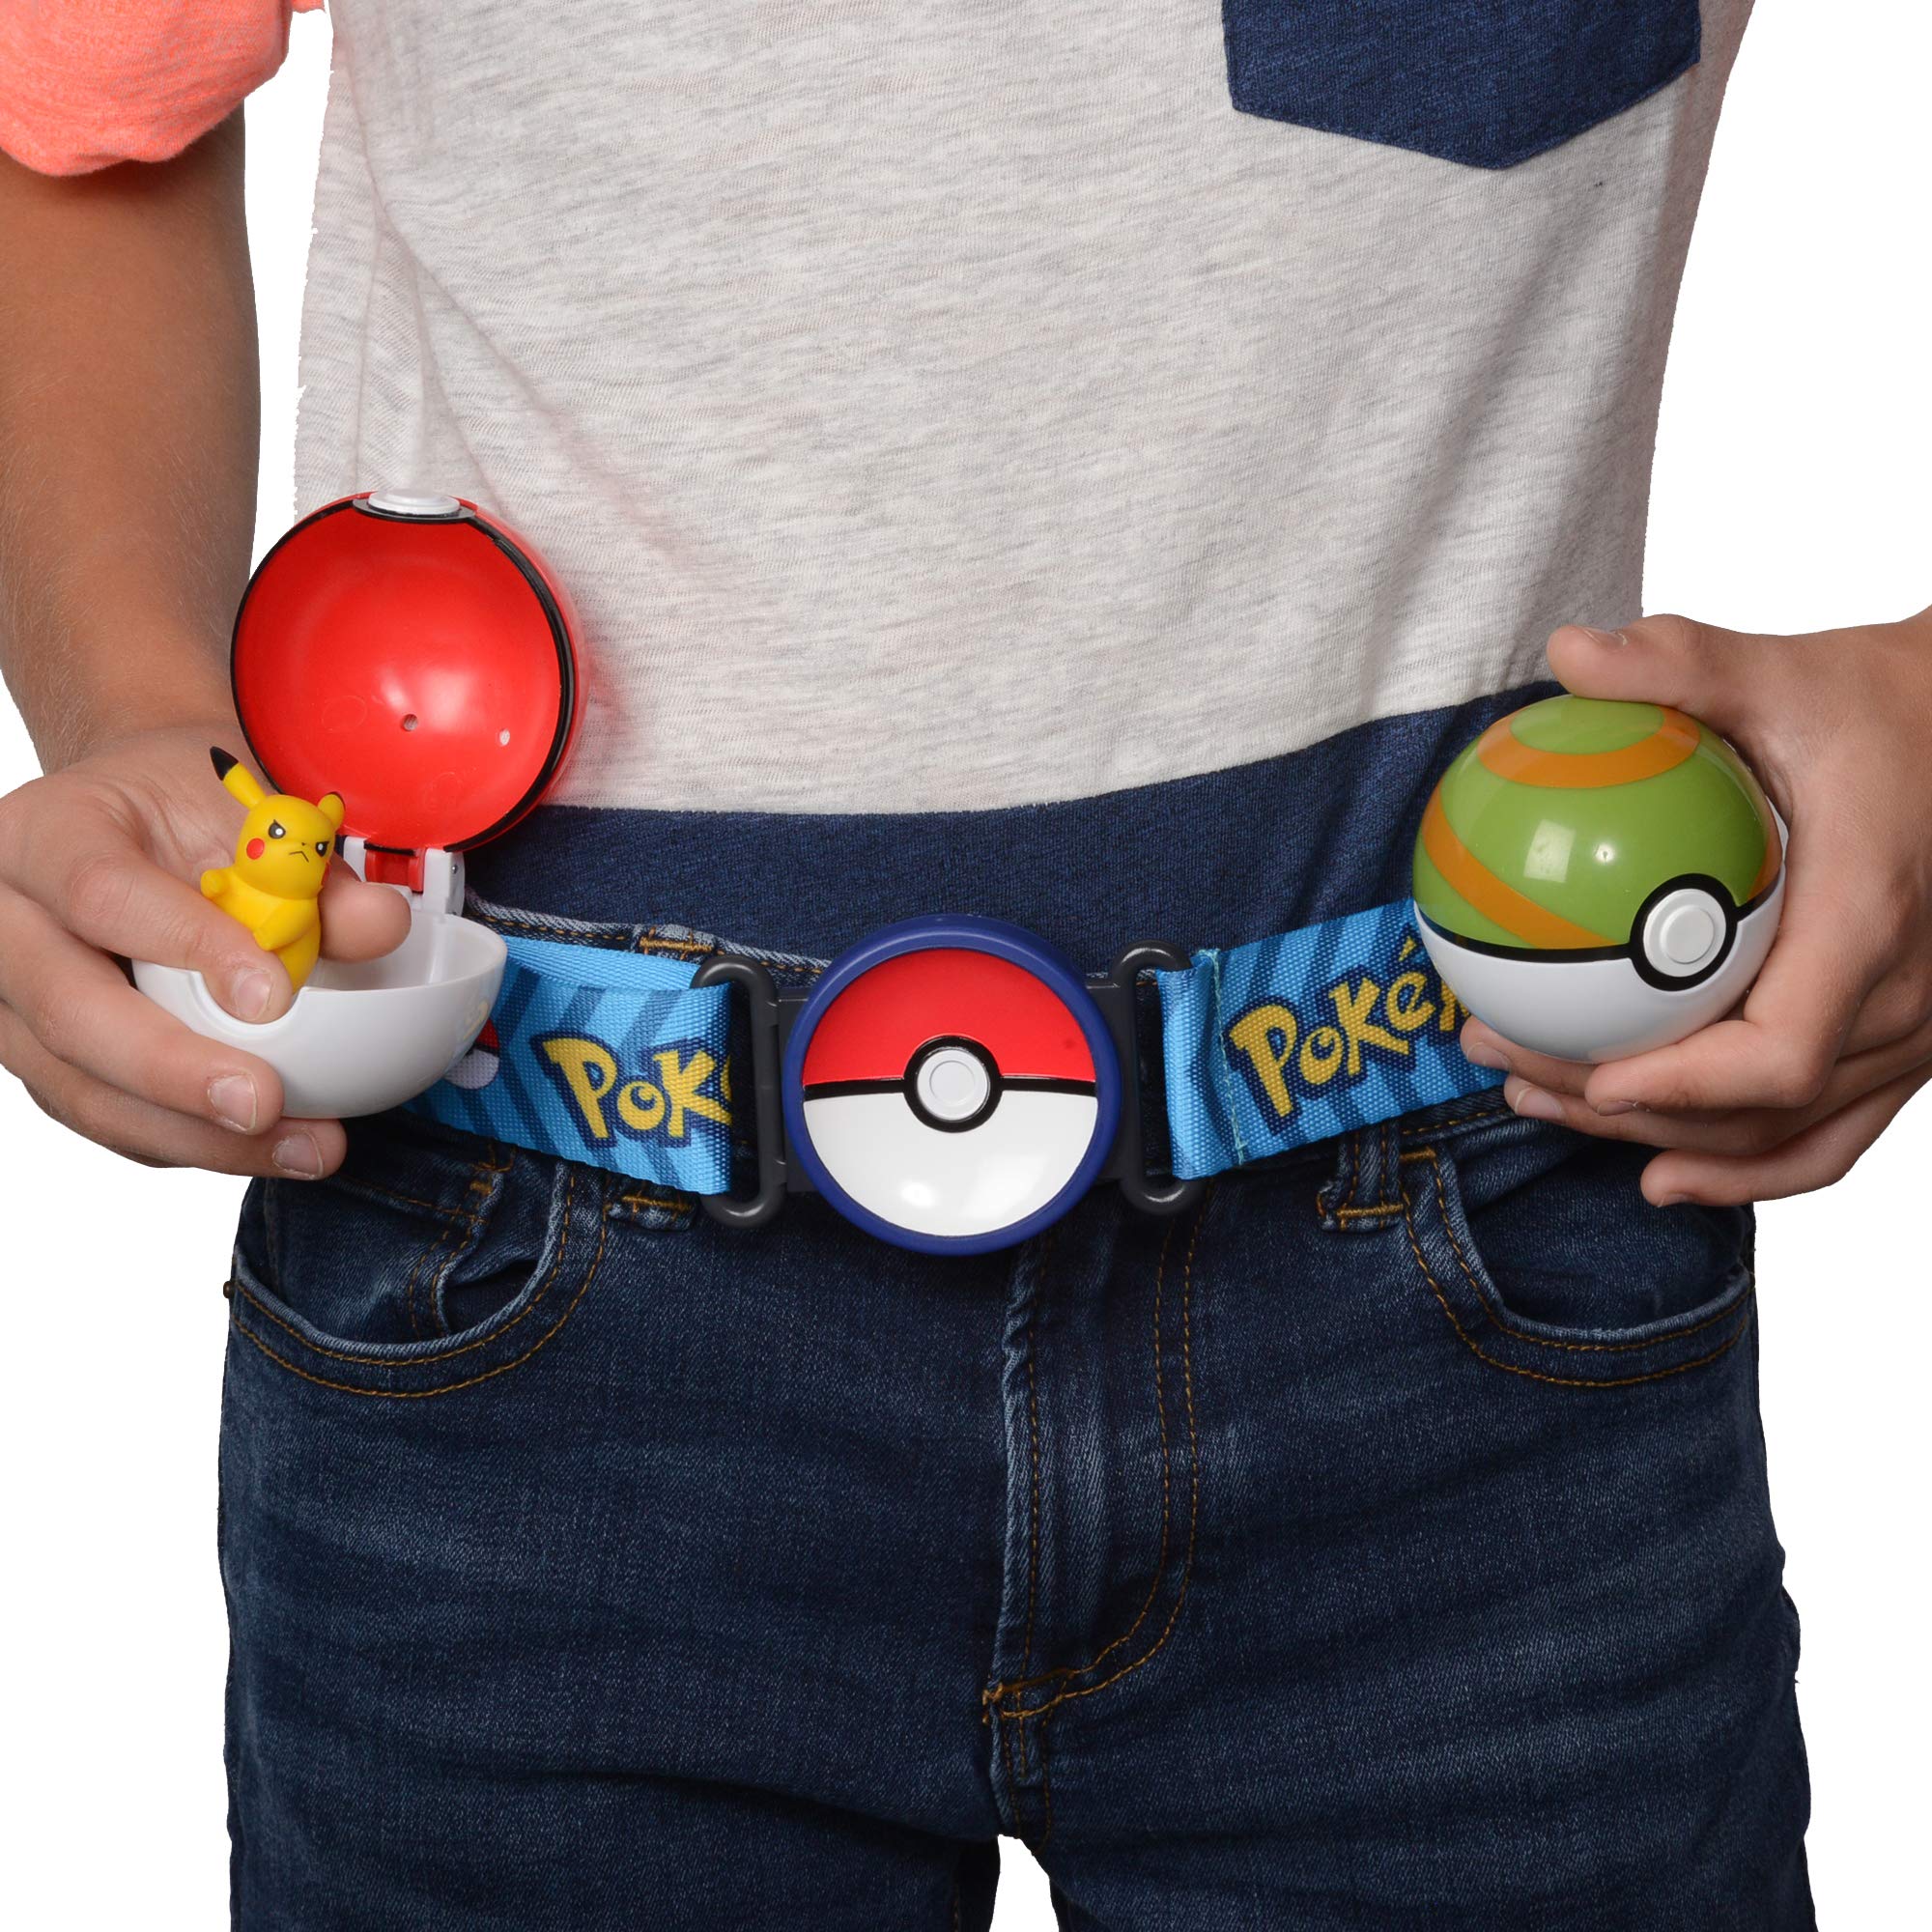 Pokemon Clip 'N' Go Poke Ball Belt Set, Comes with Poke Ball, Nest Ball and 2-Inch Pikachu Figure- Perfect for any Trainer